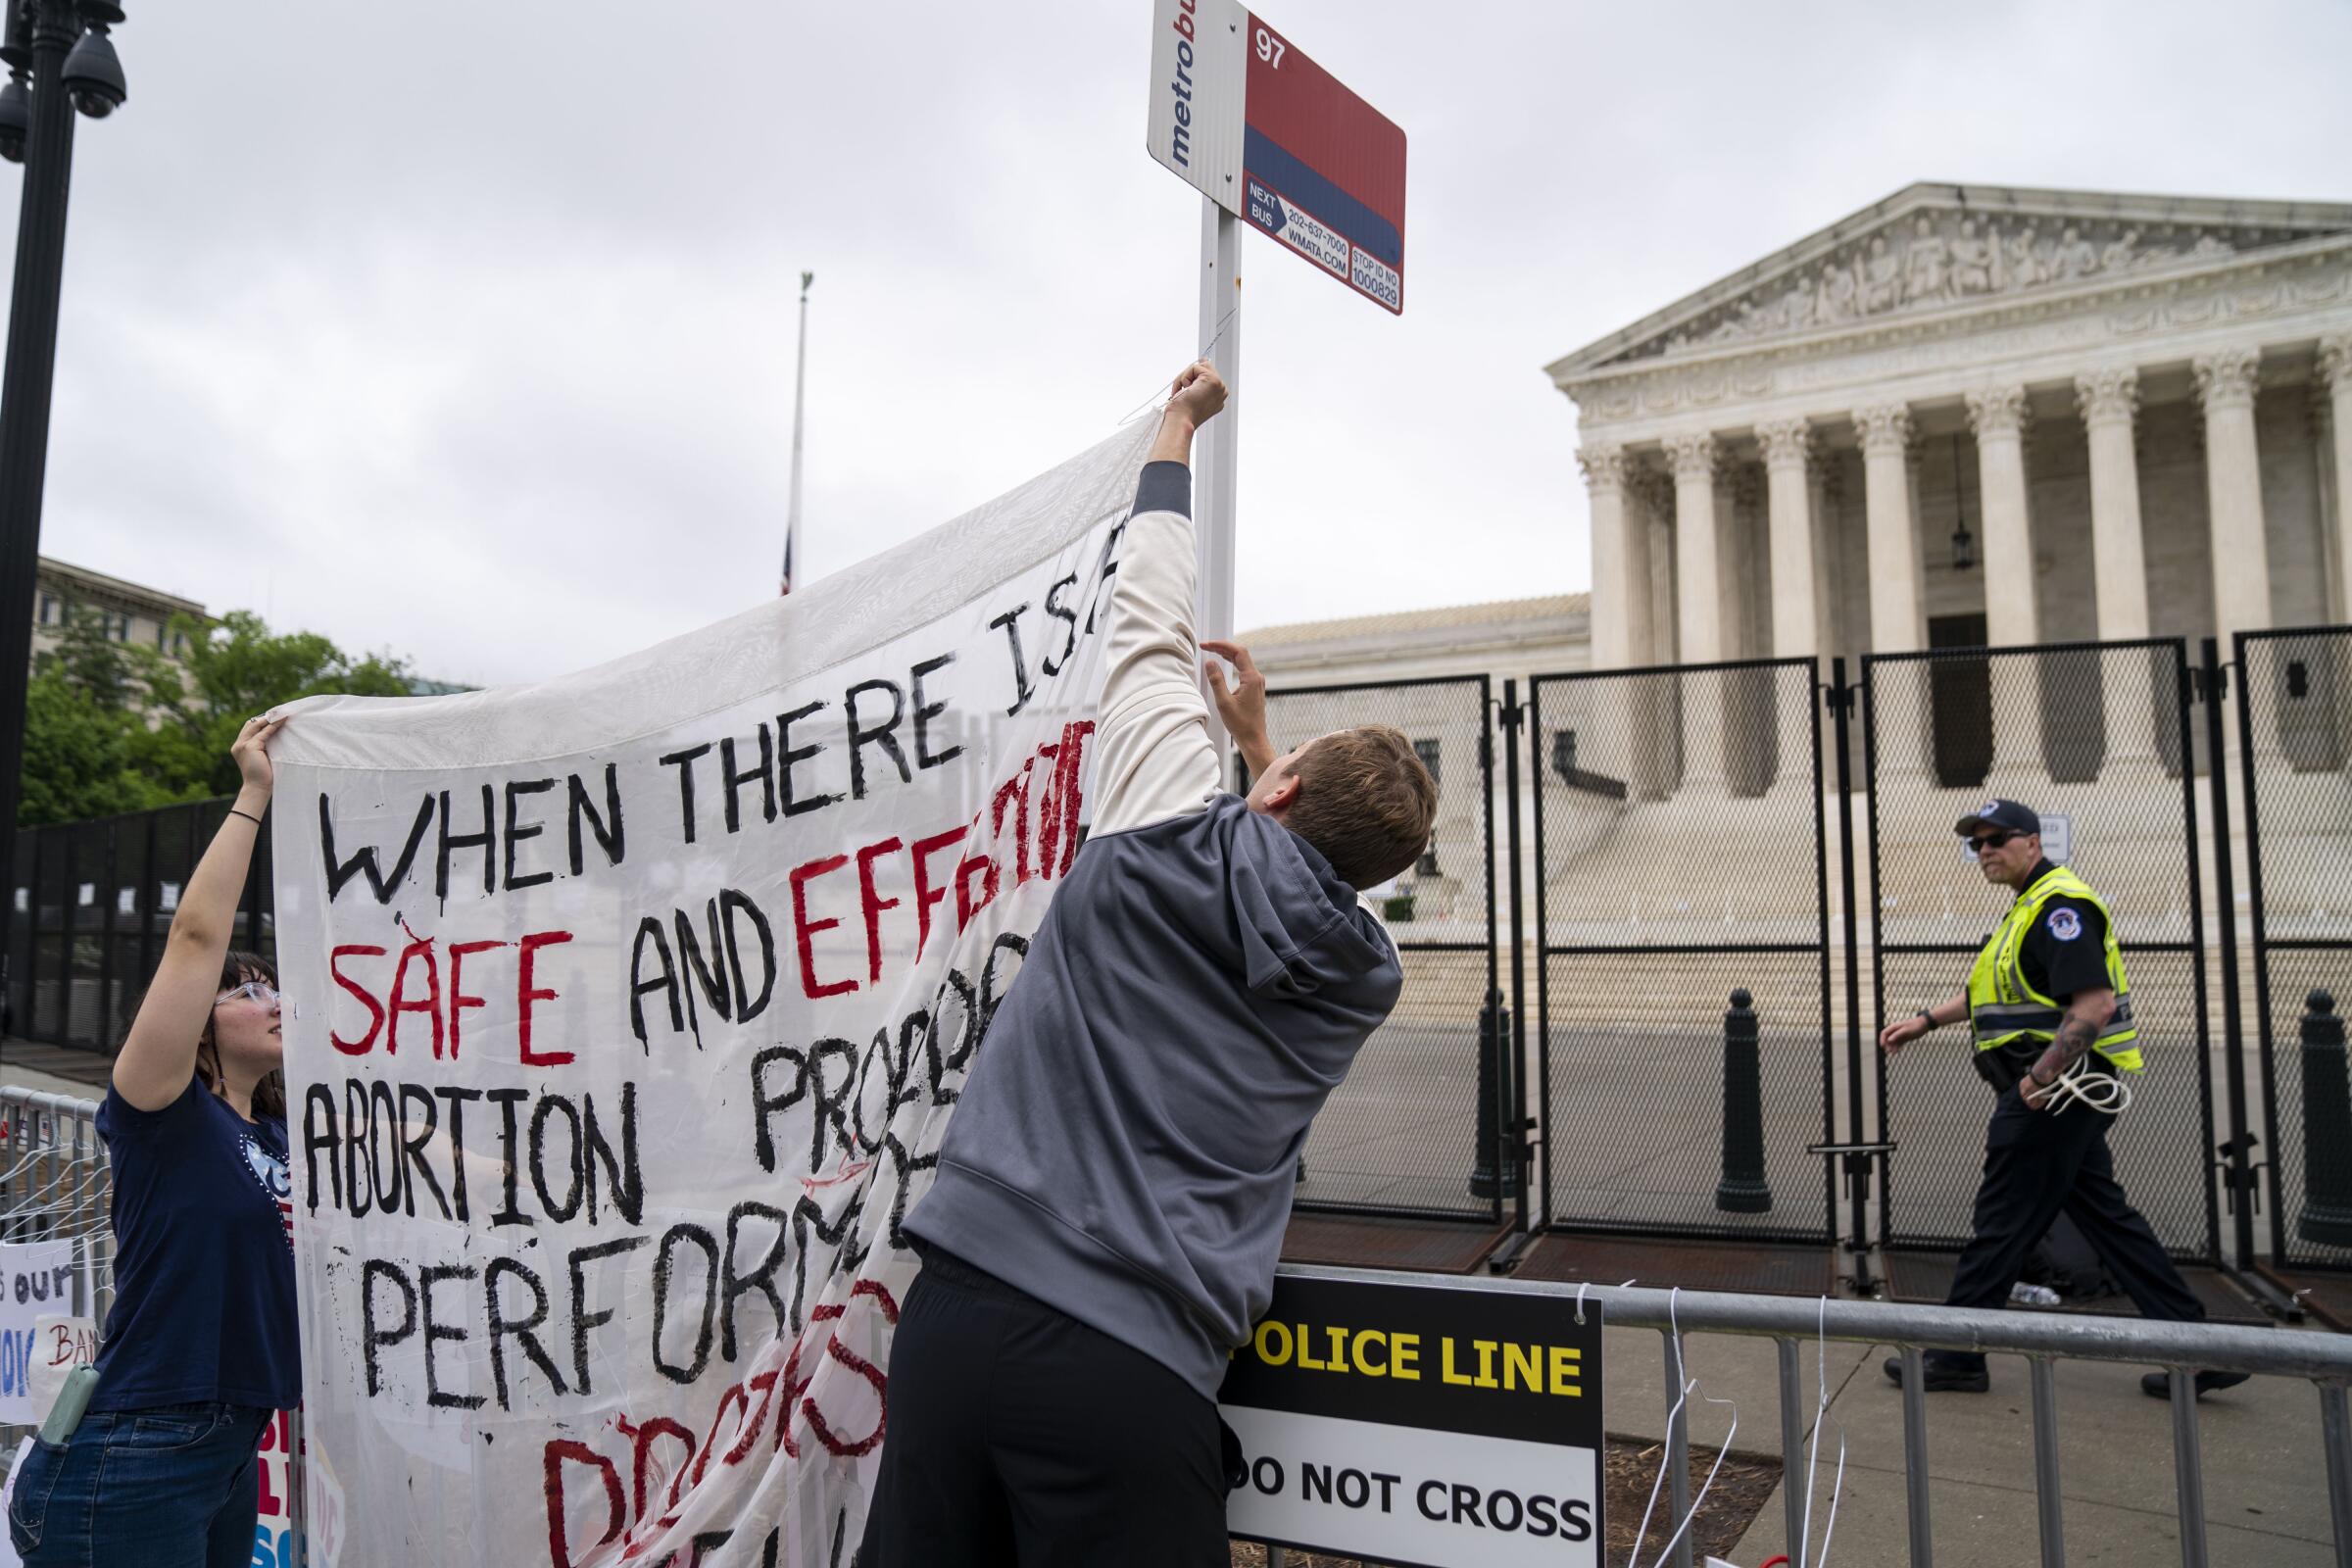 Abortion rights activists put up a banner in Washington, D.C.